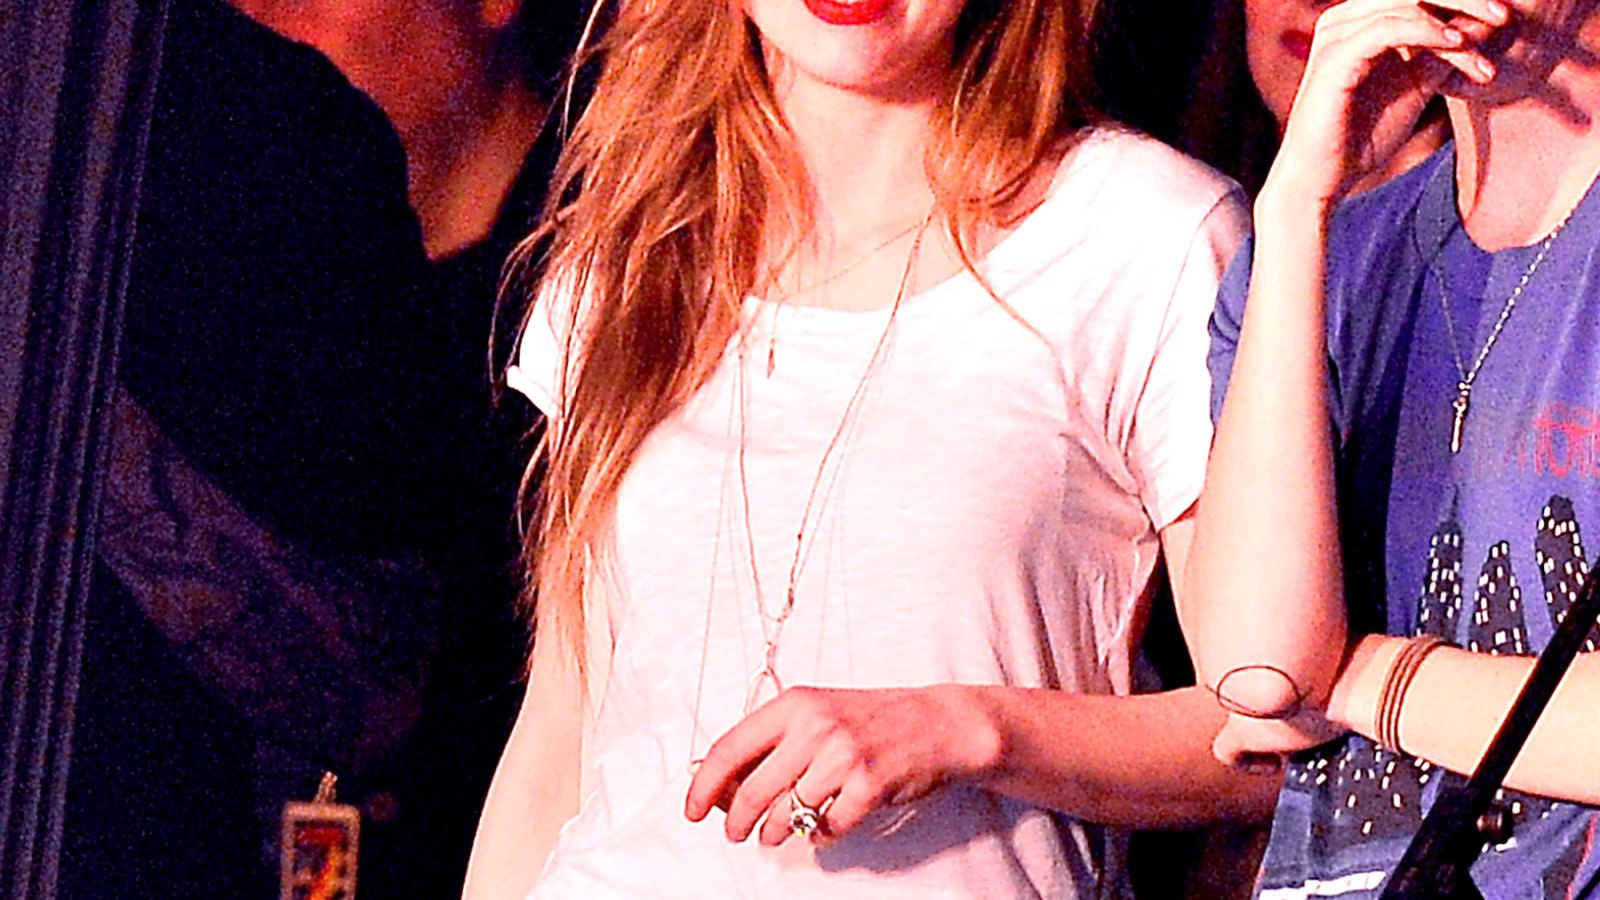 Amber Heard shows off her engagement ring on Jan. 27, 2014